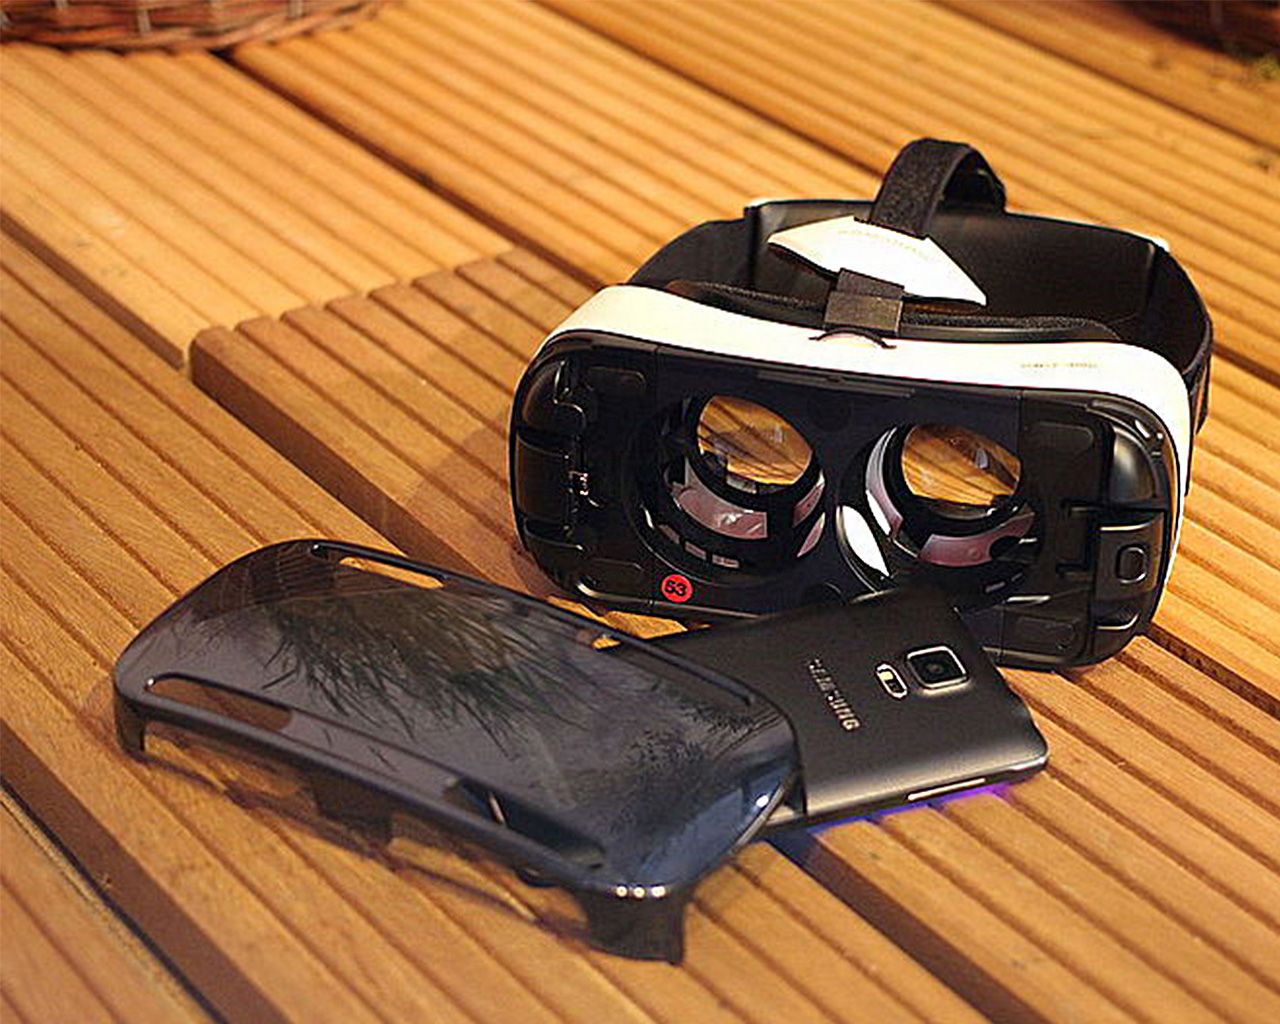 Samsung Gear VR with Samsung smartphone. Courtesy photo. Source: https://upload.wikimedia.org/wikipedia/commons/4/40/Samsung_Gear_VR_%2815060788240%29.jpg